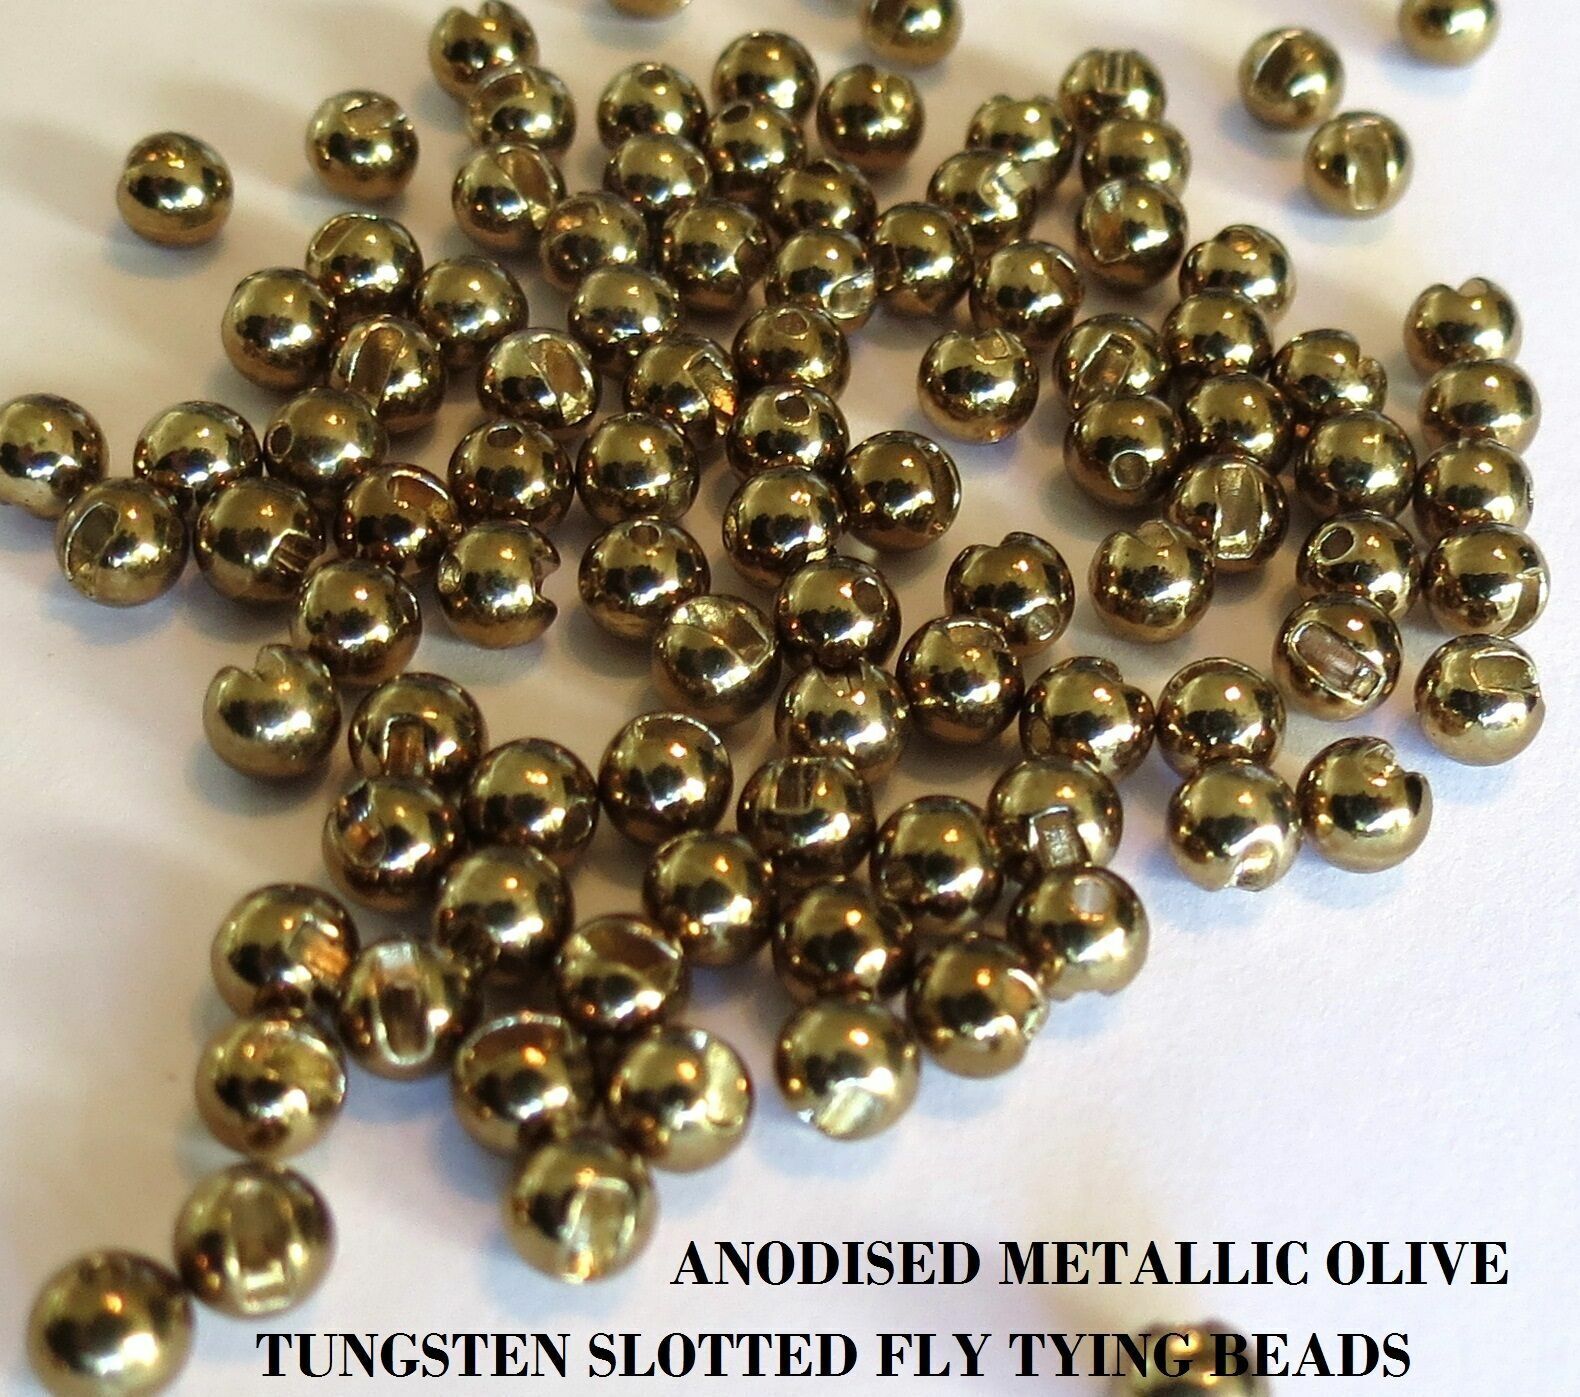 met OLIVE SLOTTED Tungsten Fly Tying Beads 2.5-4.0mm 3/32